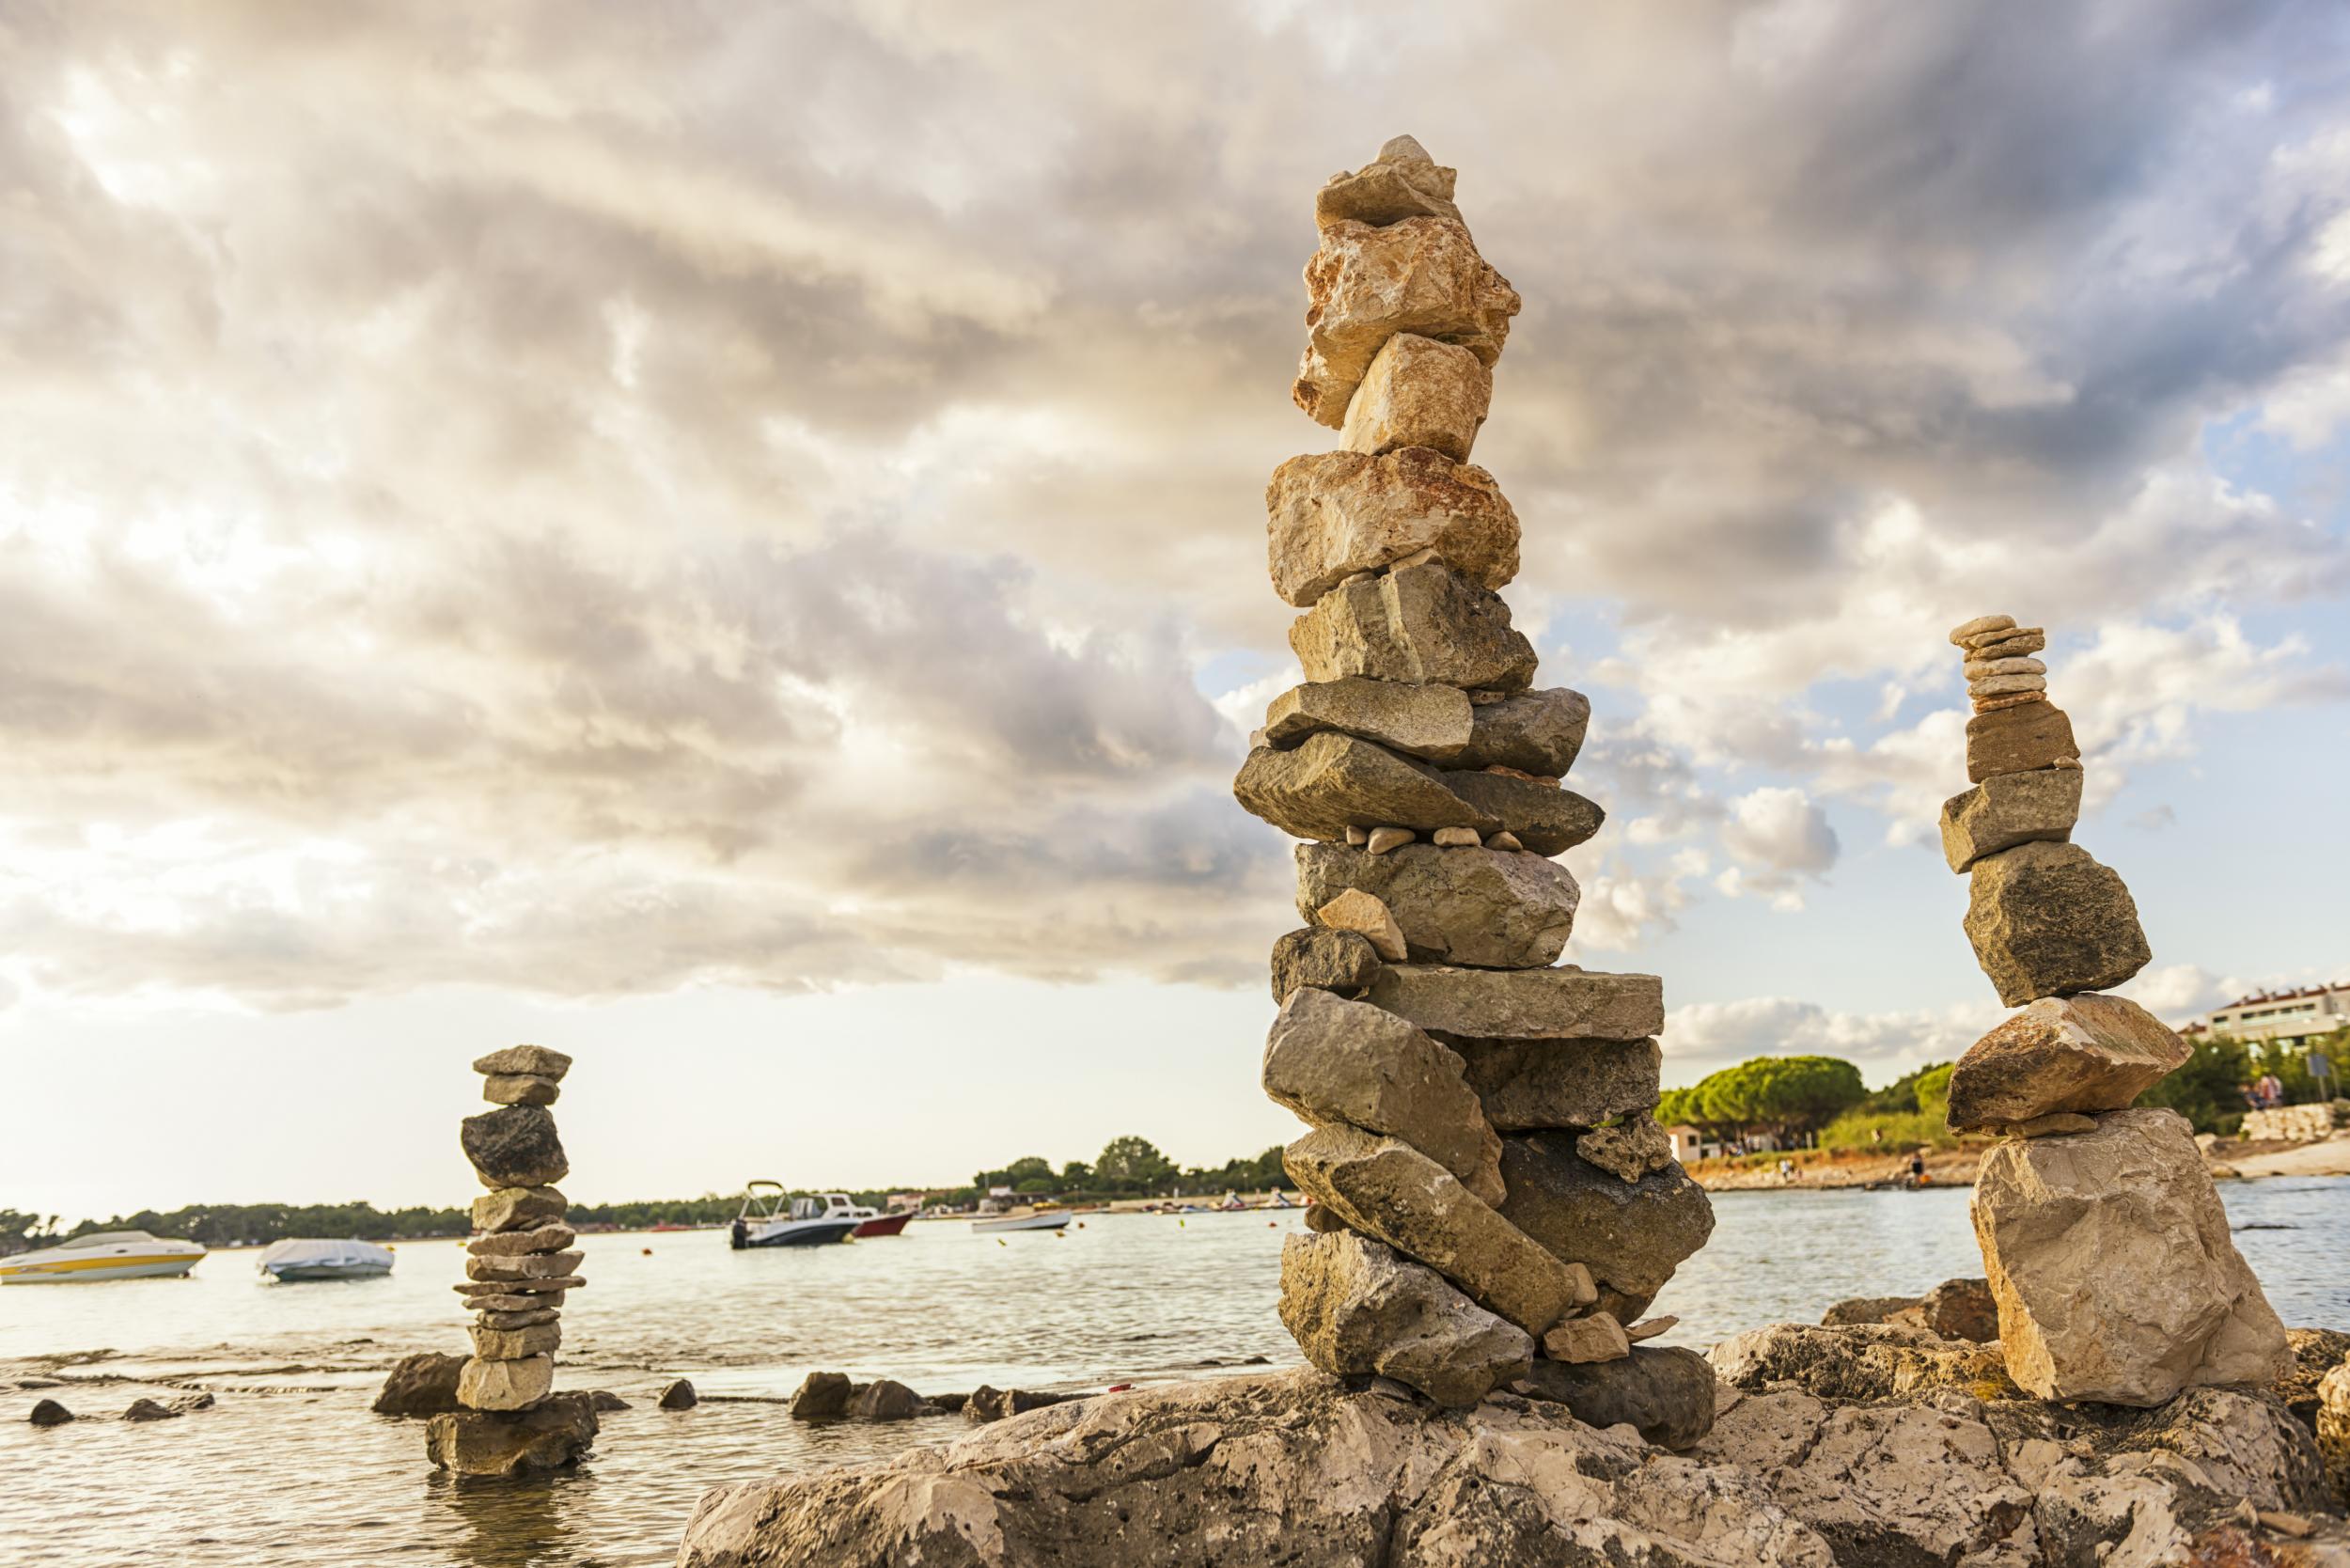 Tall piles of stacked stones may look pretty, but they could have an impact on fragile ecosystems